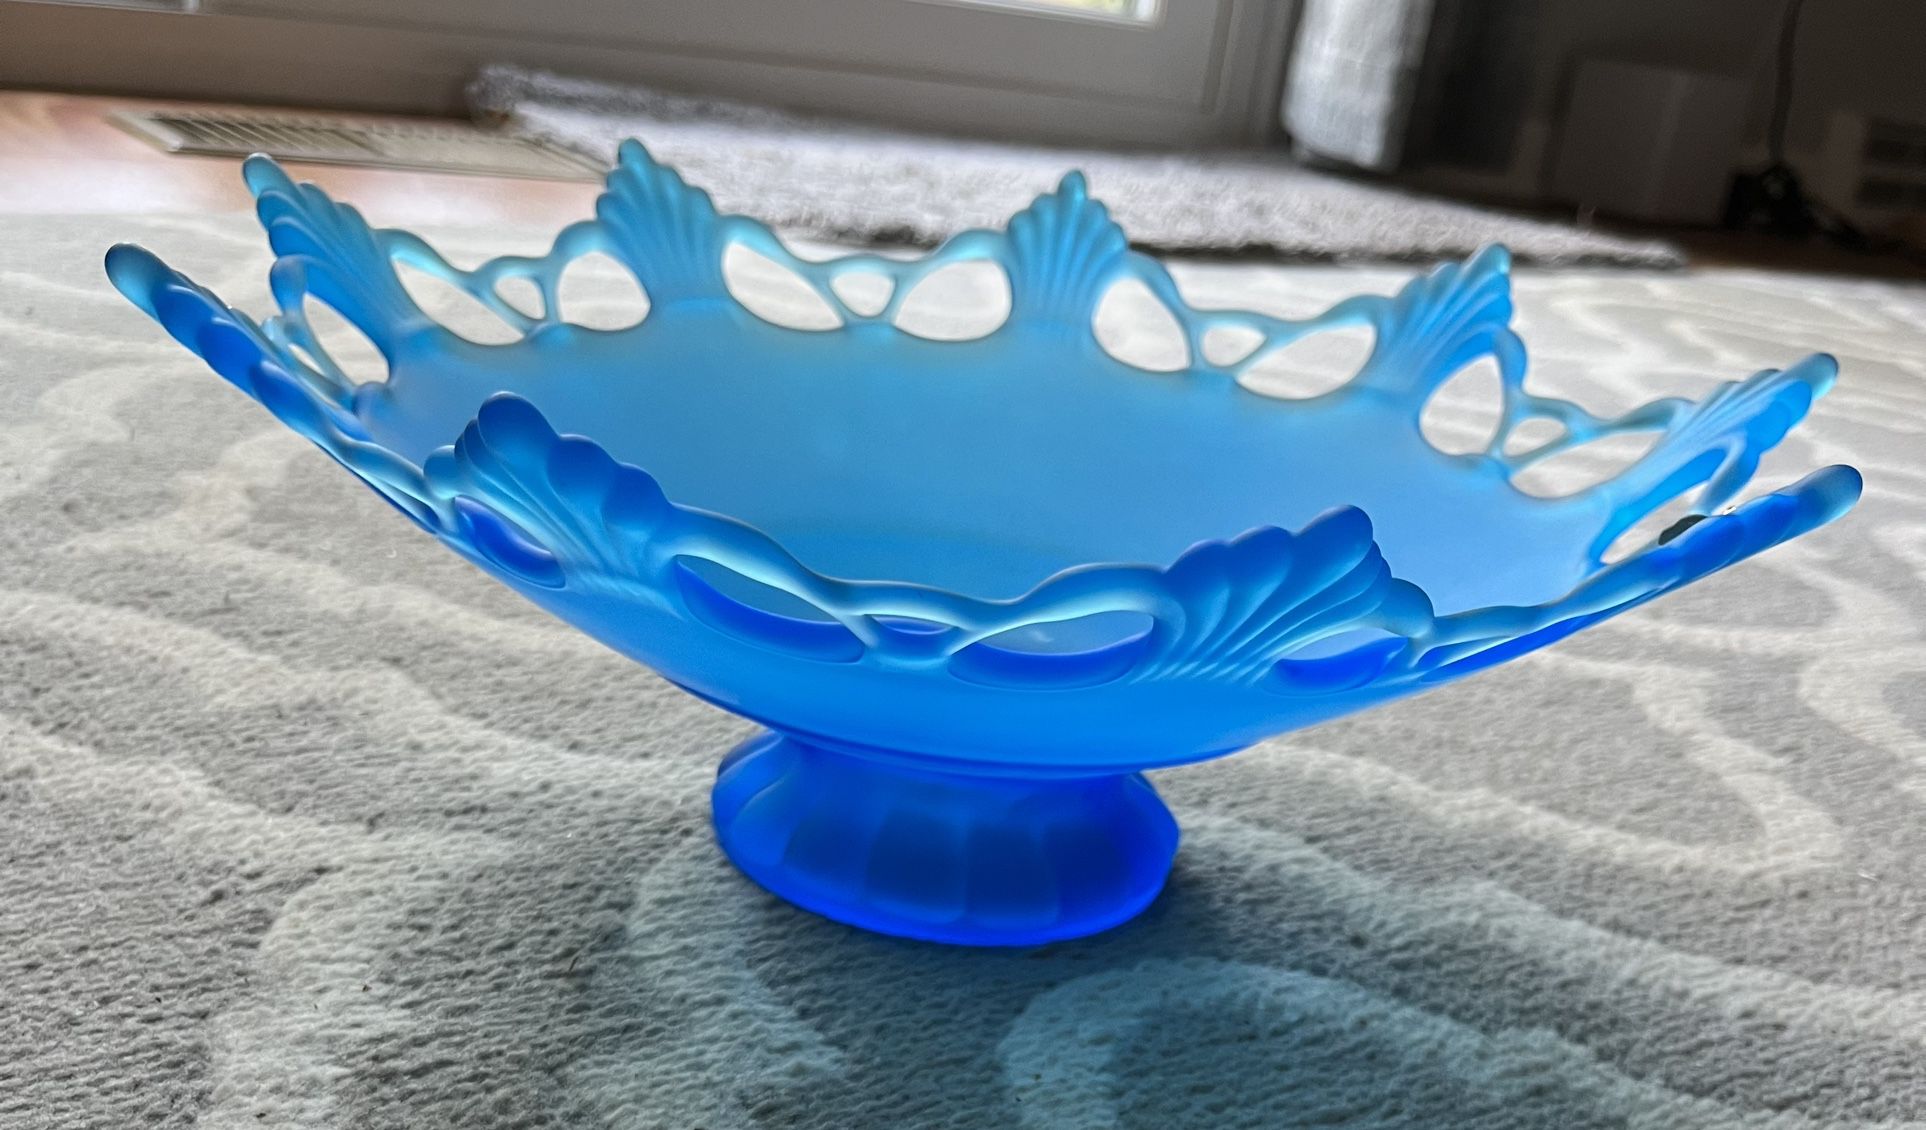 Vintage Pedestal Bowl, Blue Frosted Glass, Westmoreland, Mid-Century Bowl, Footed